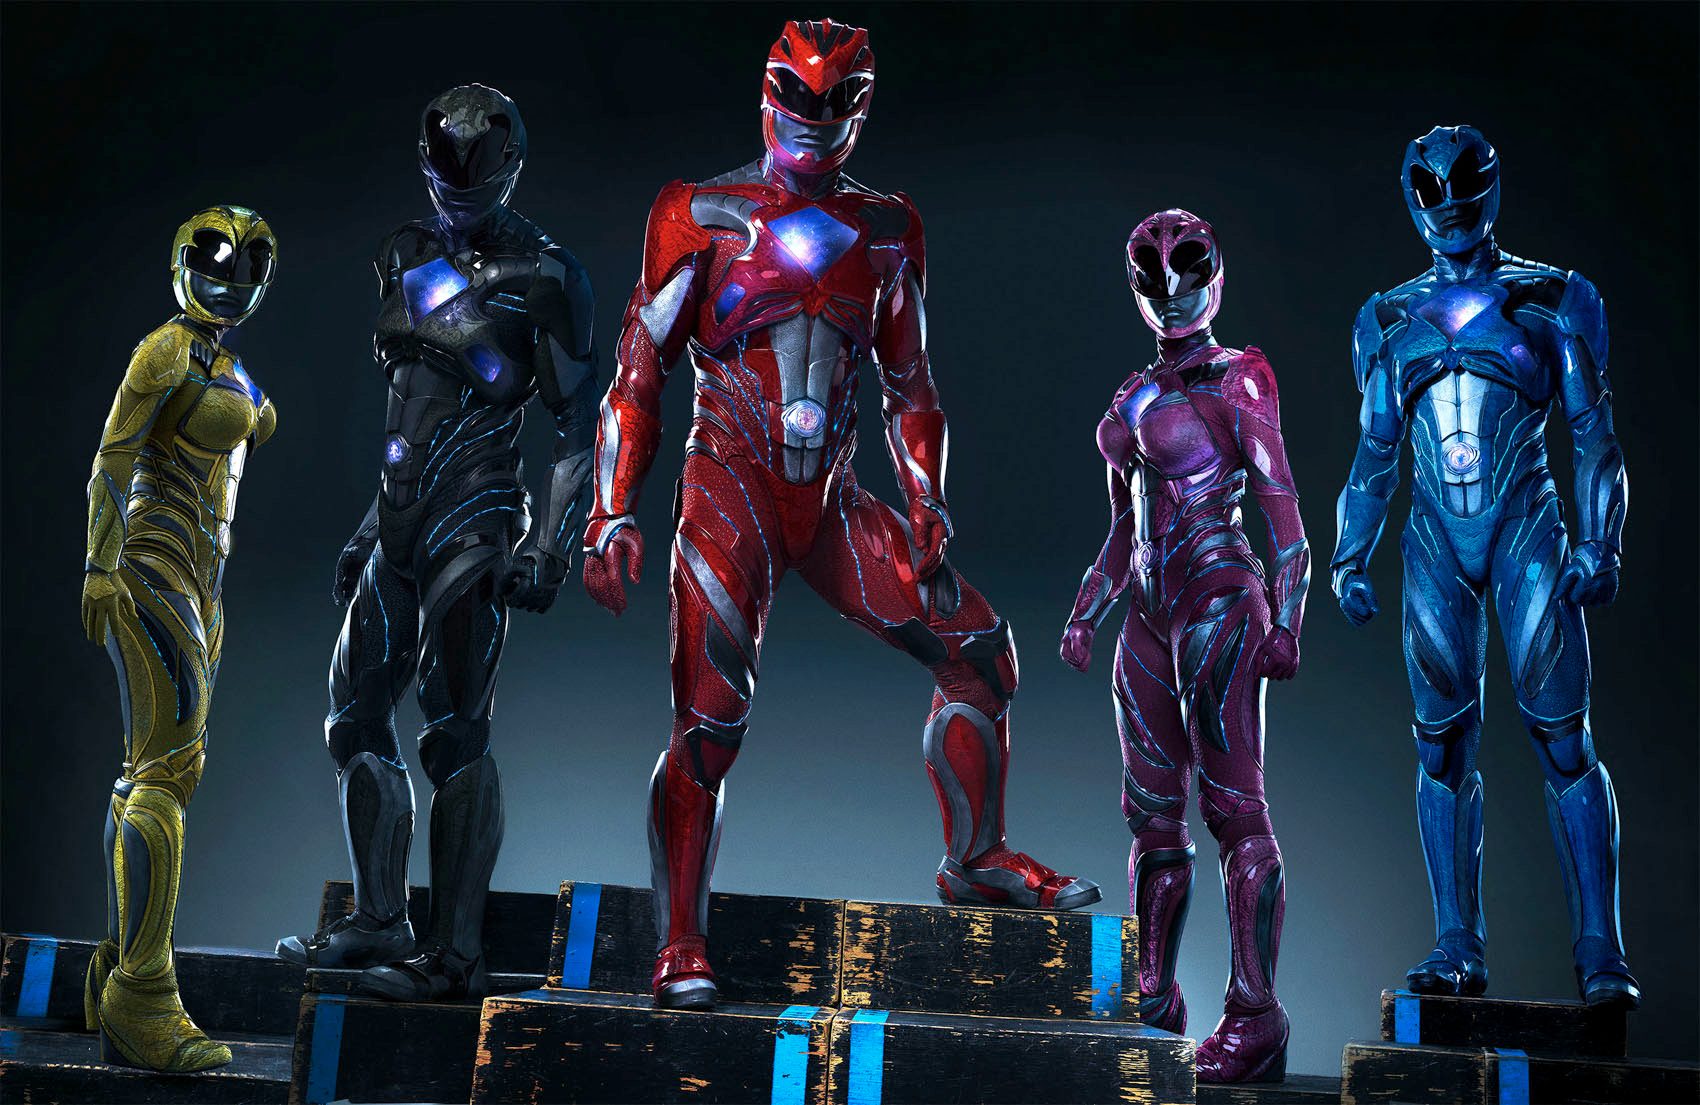 ‘Power Rangers’ Review: Big, corny, but very engrossing